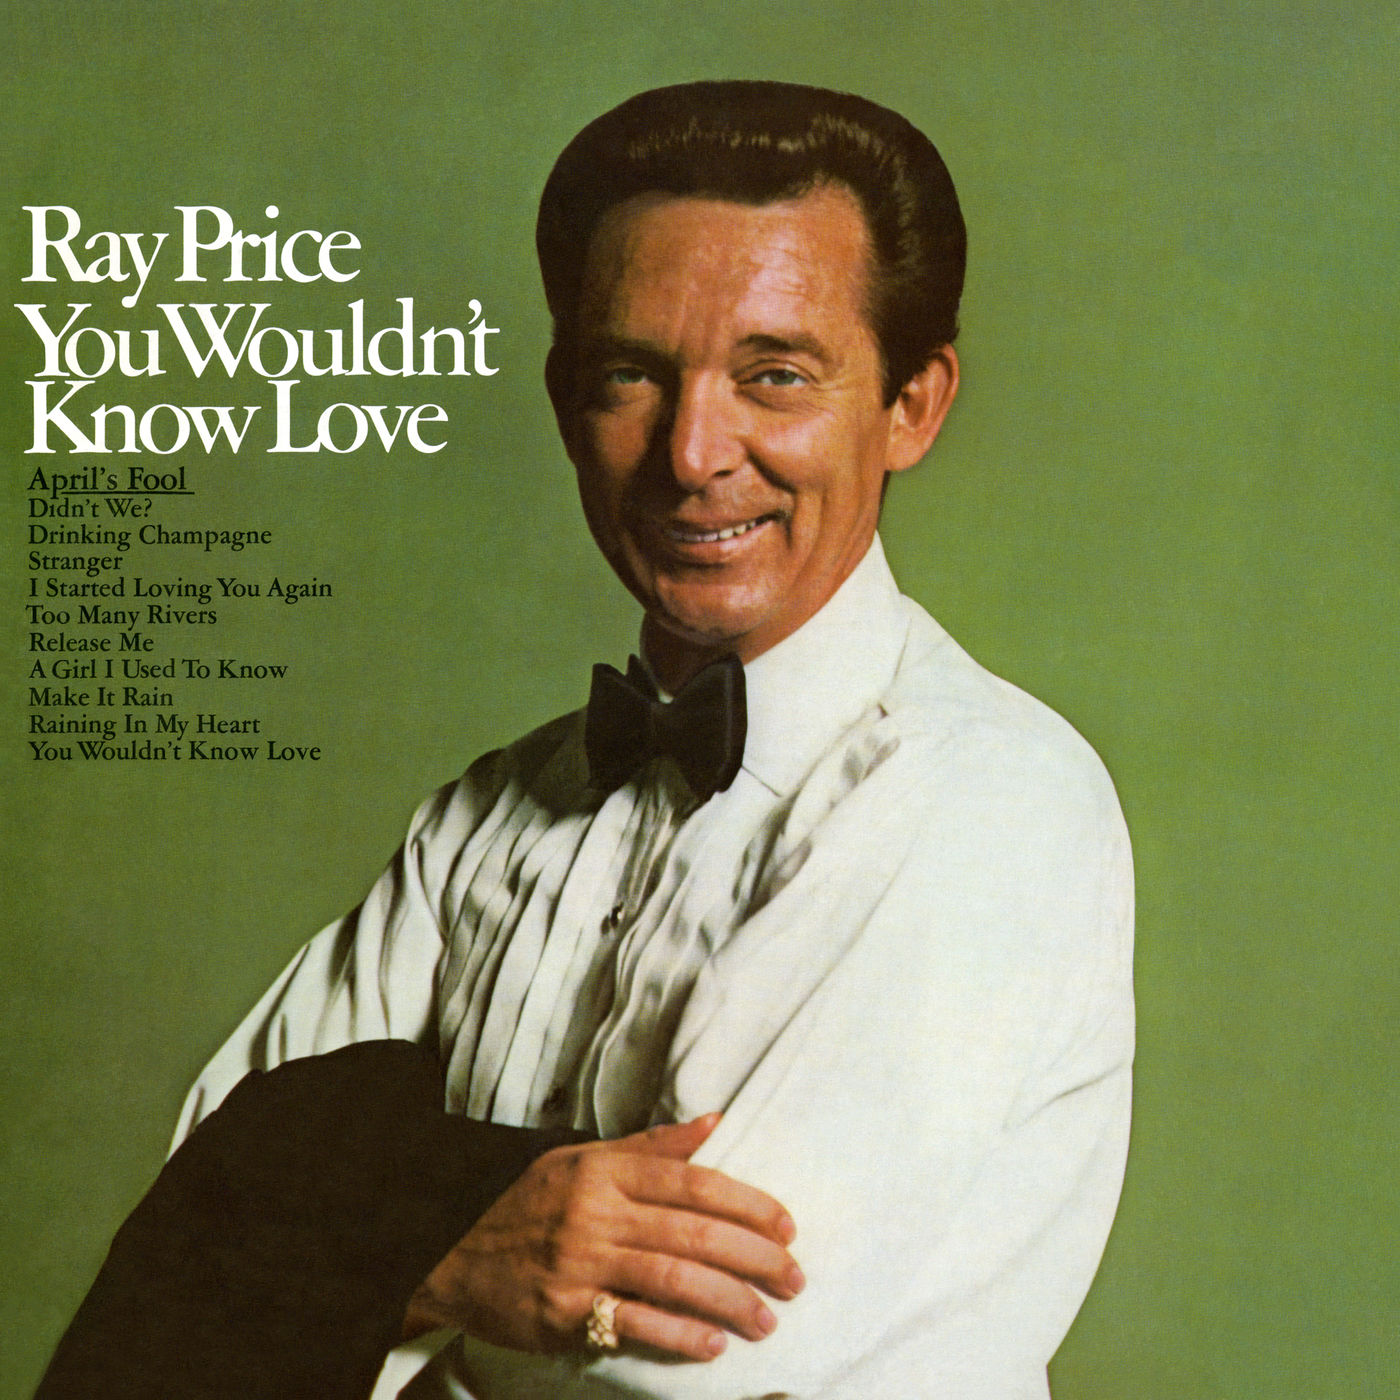 Ray Price – You Wouldn’t Know Love